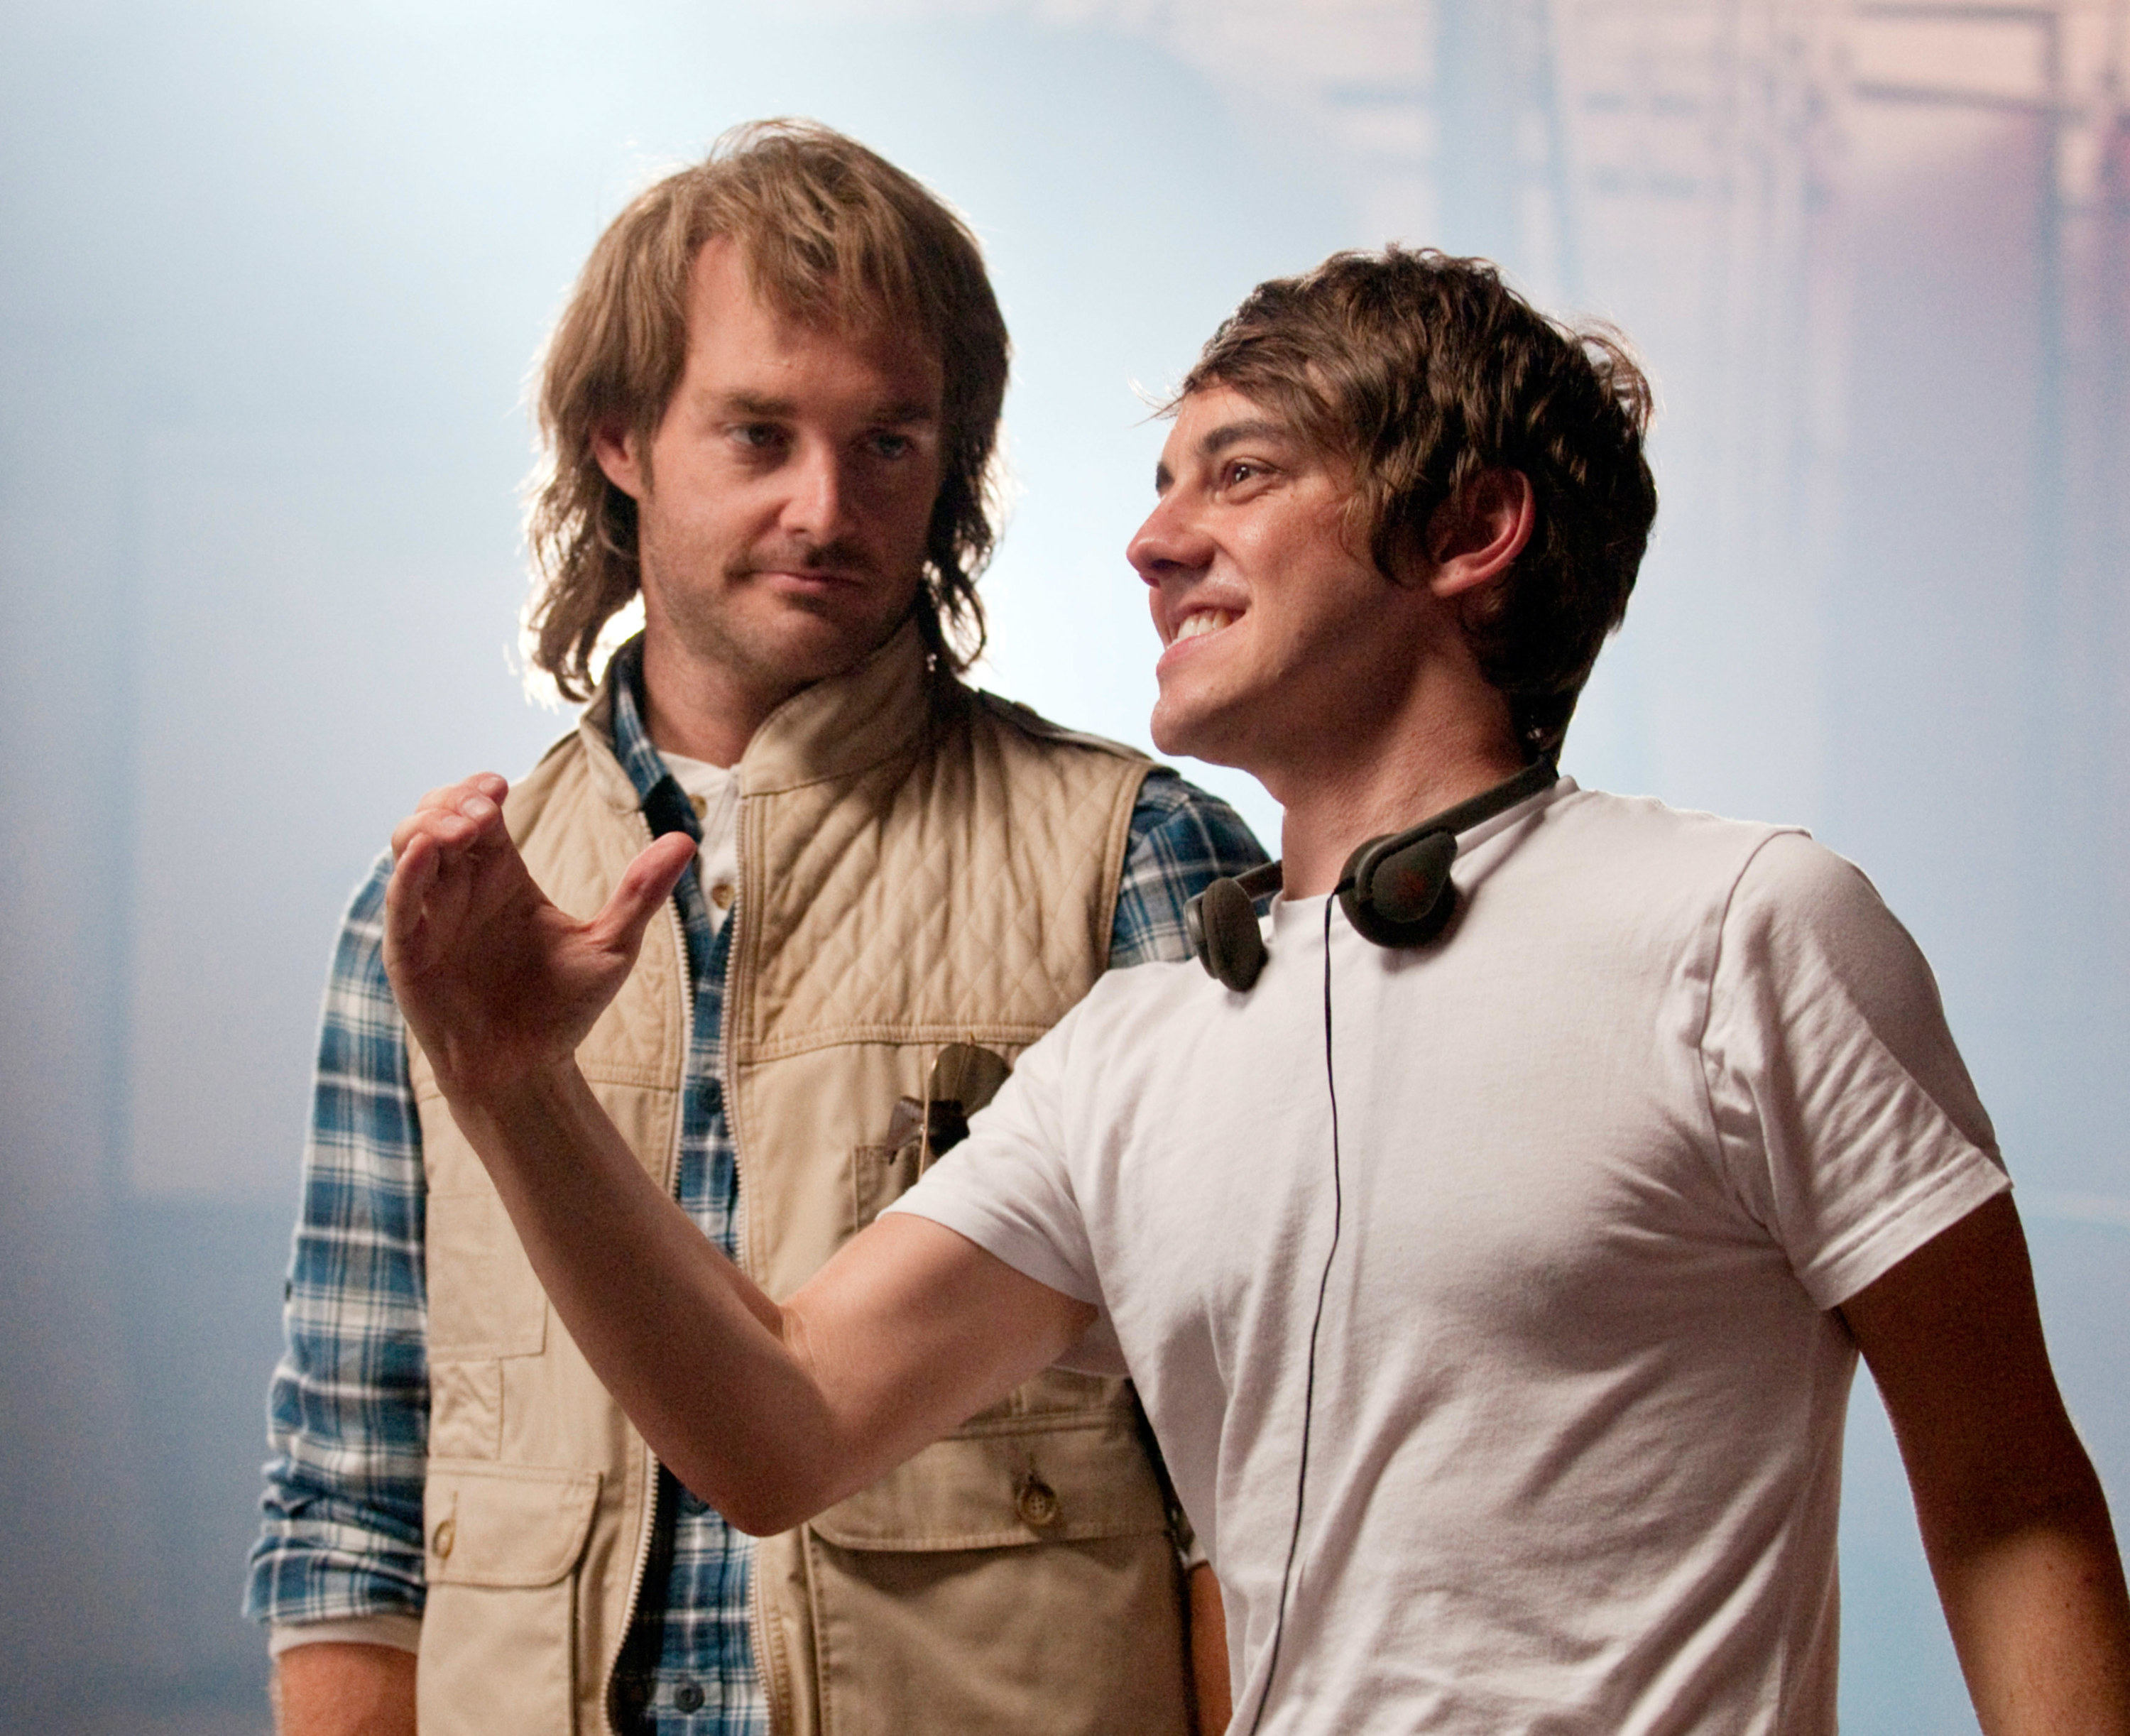 Will and Jorma talk on the set of the movie